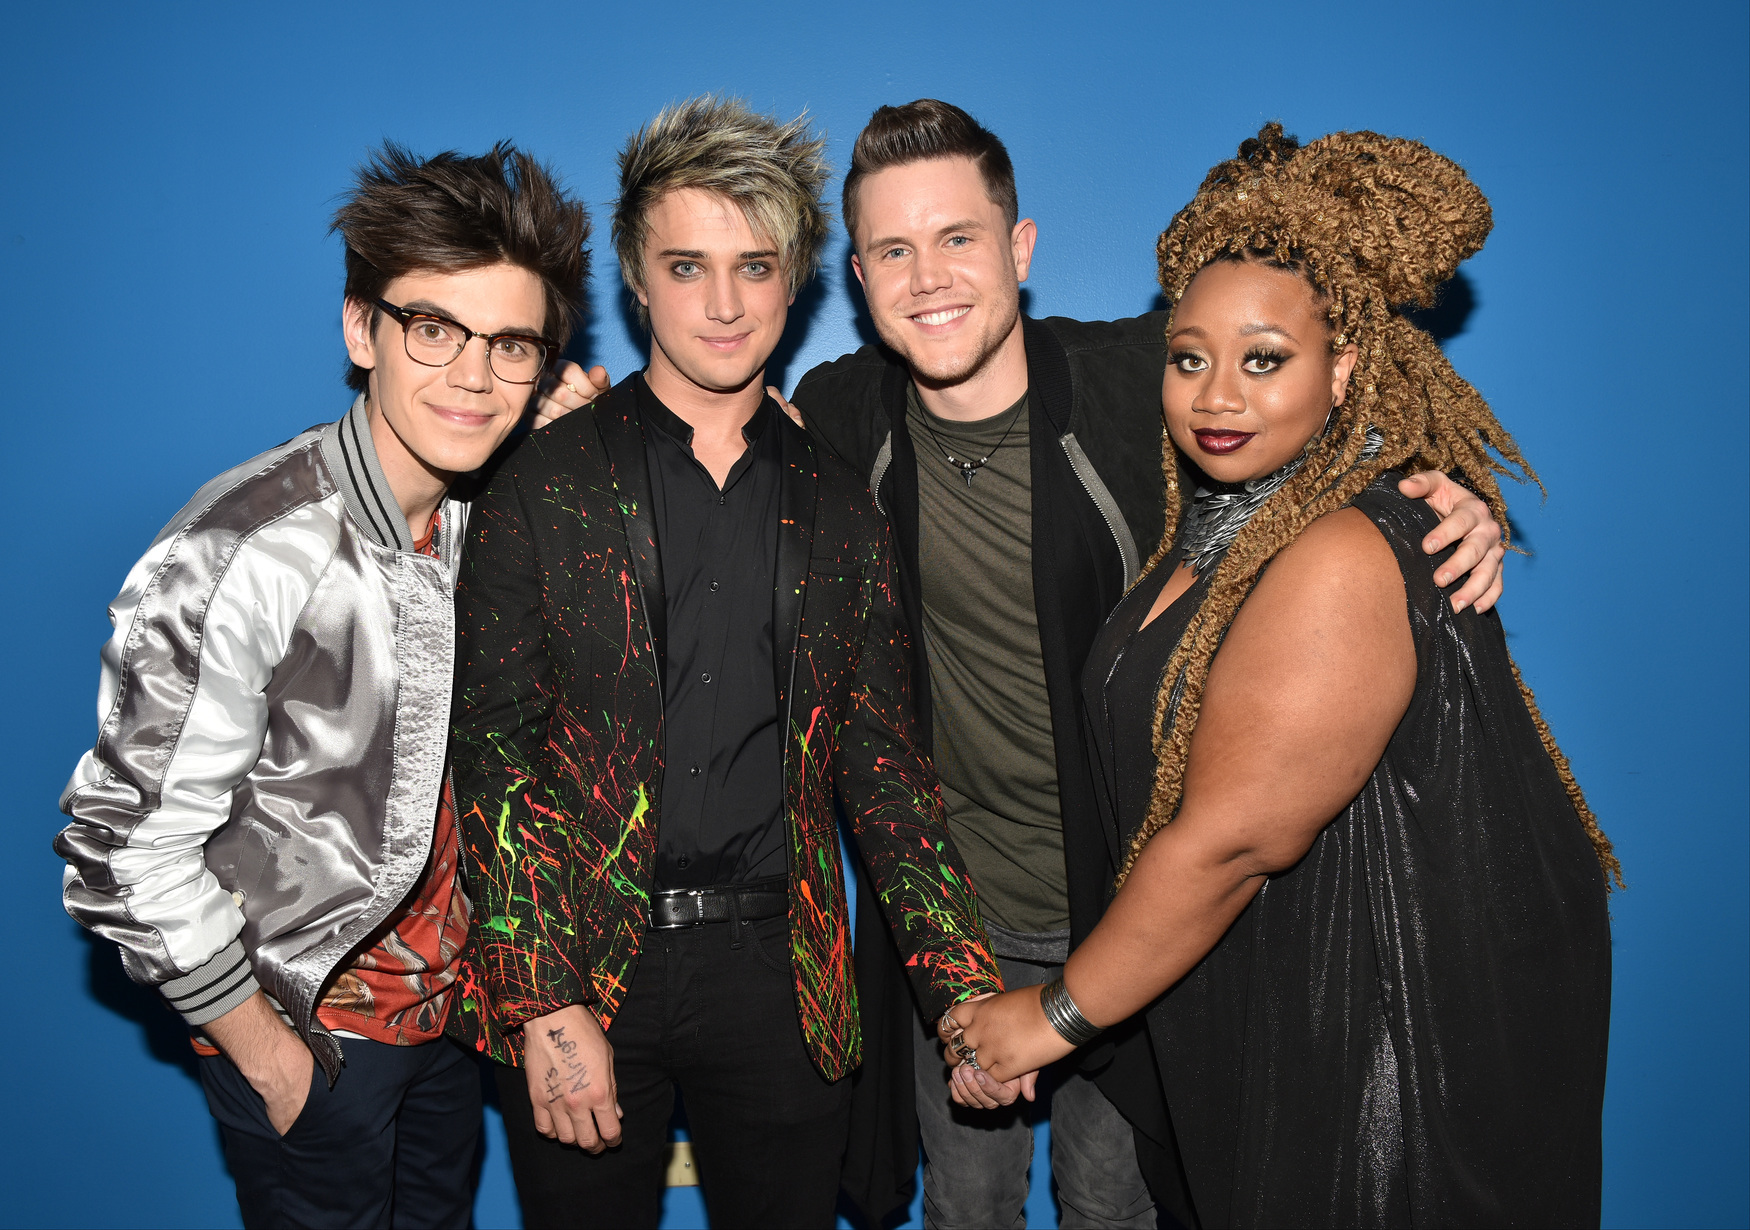 American Idol: Top 4 Revealed - Who Went Home?